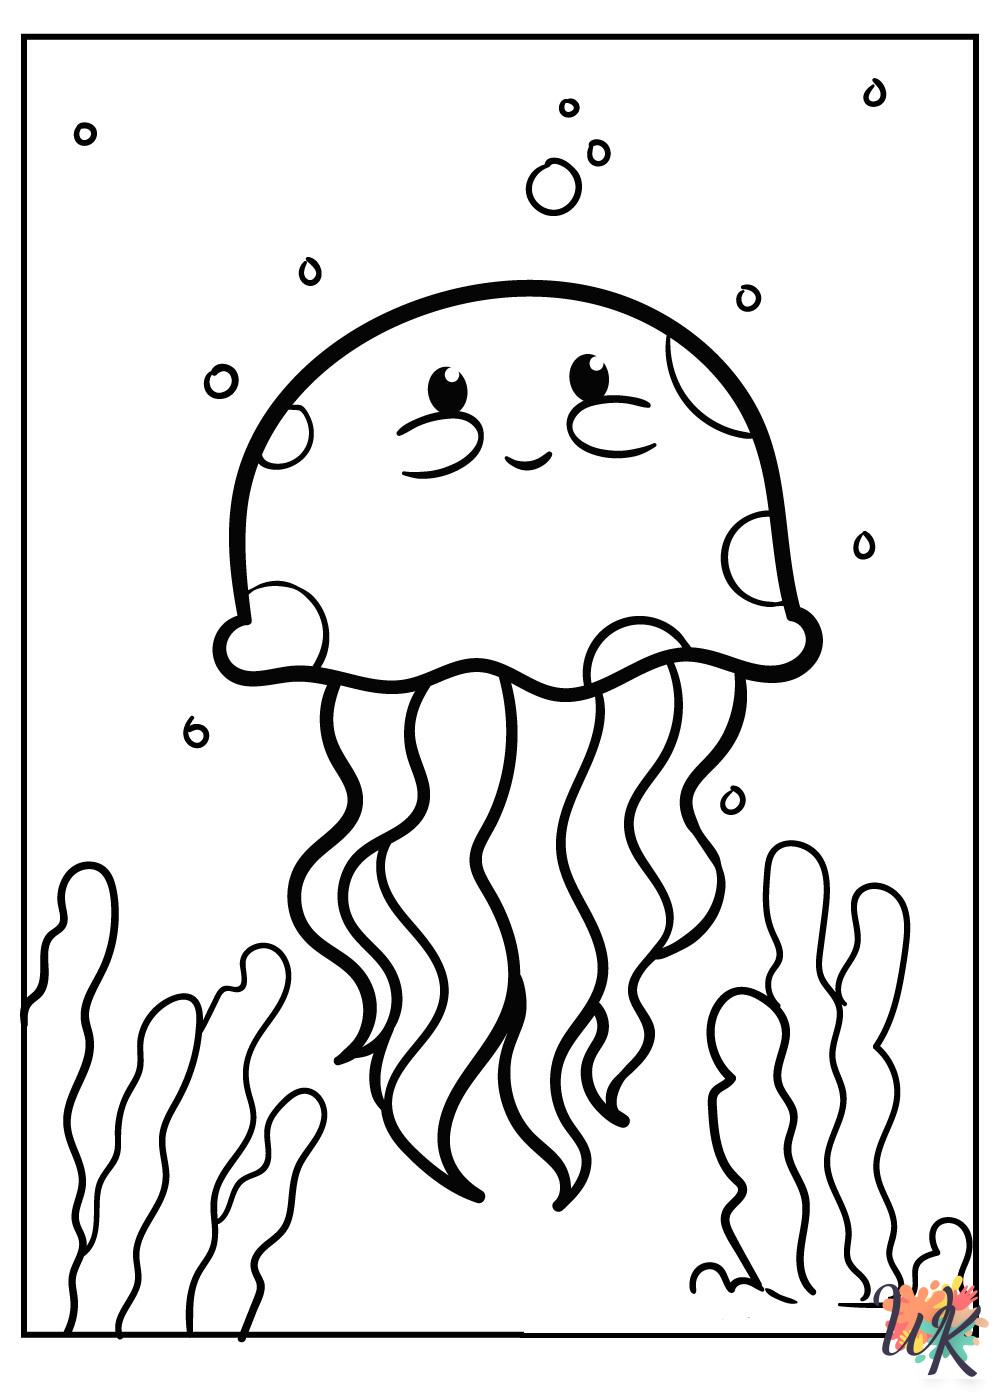 fun Under The Sea coloring pages